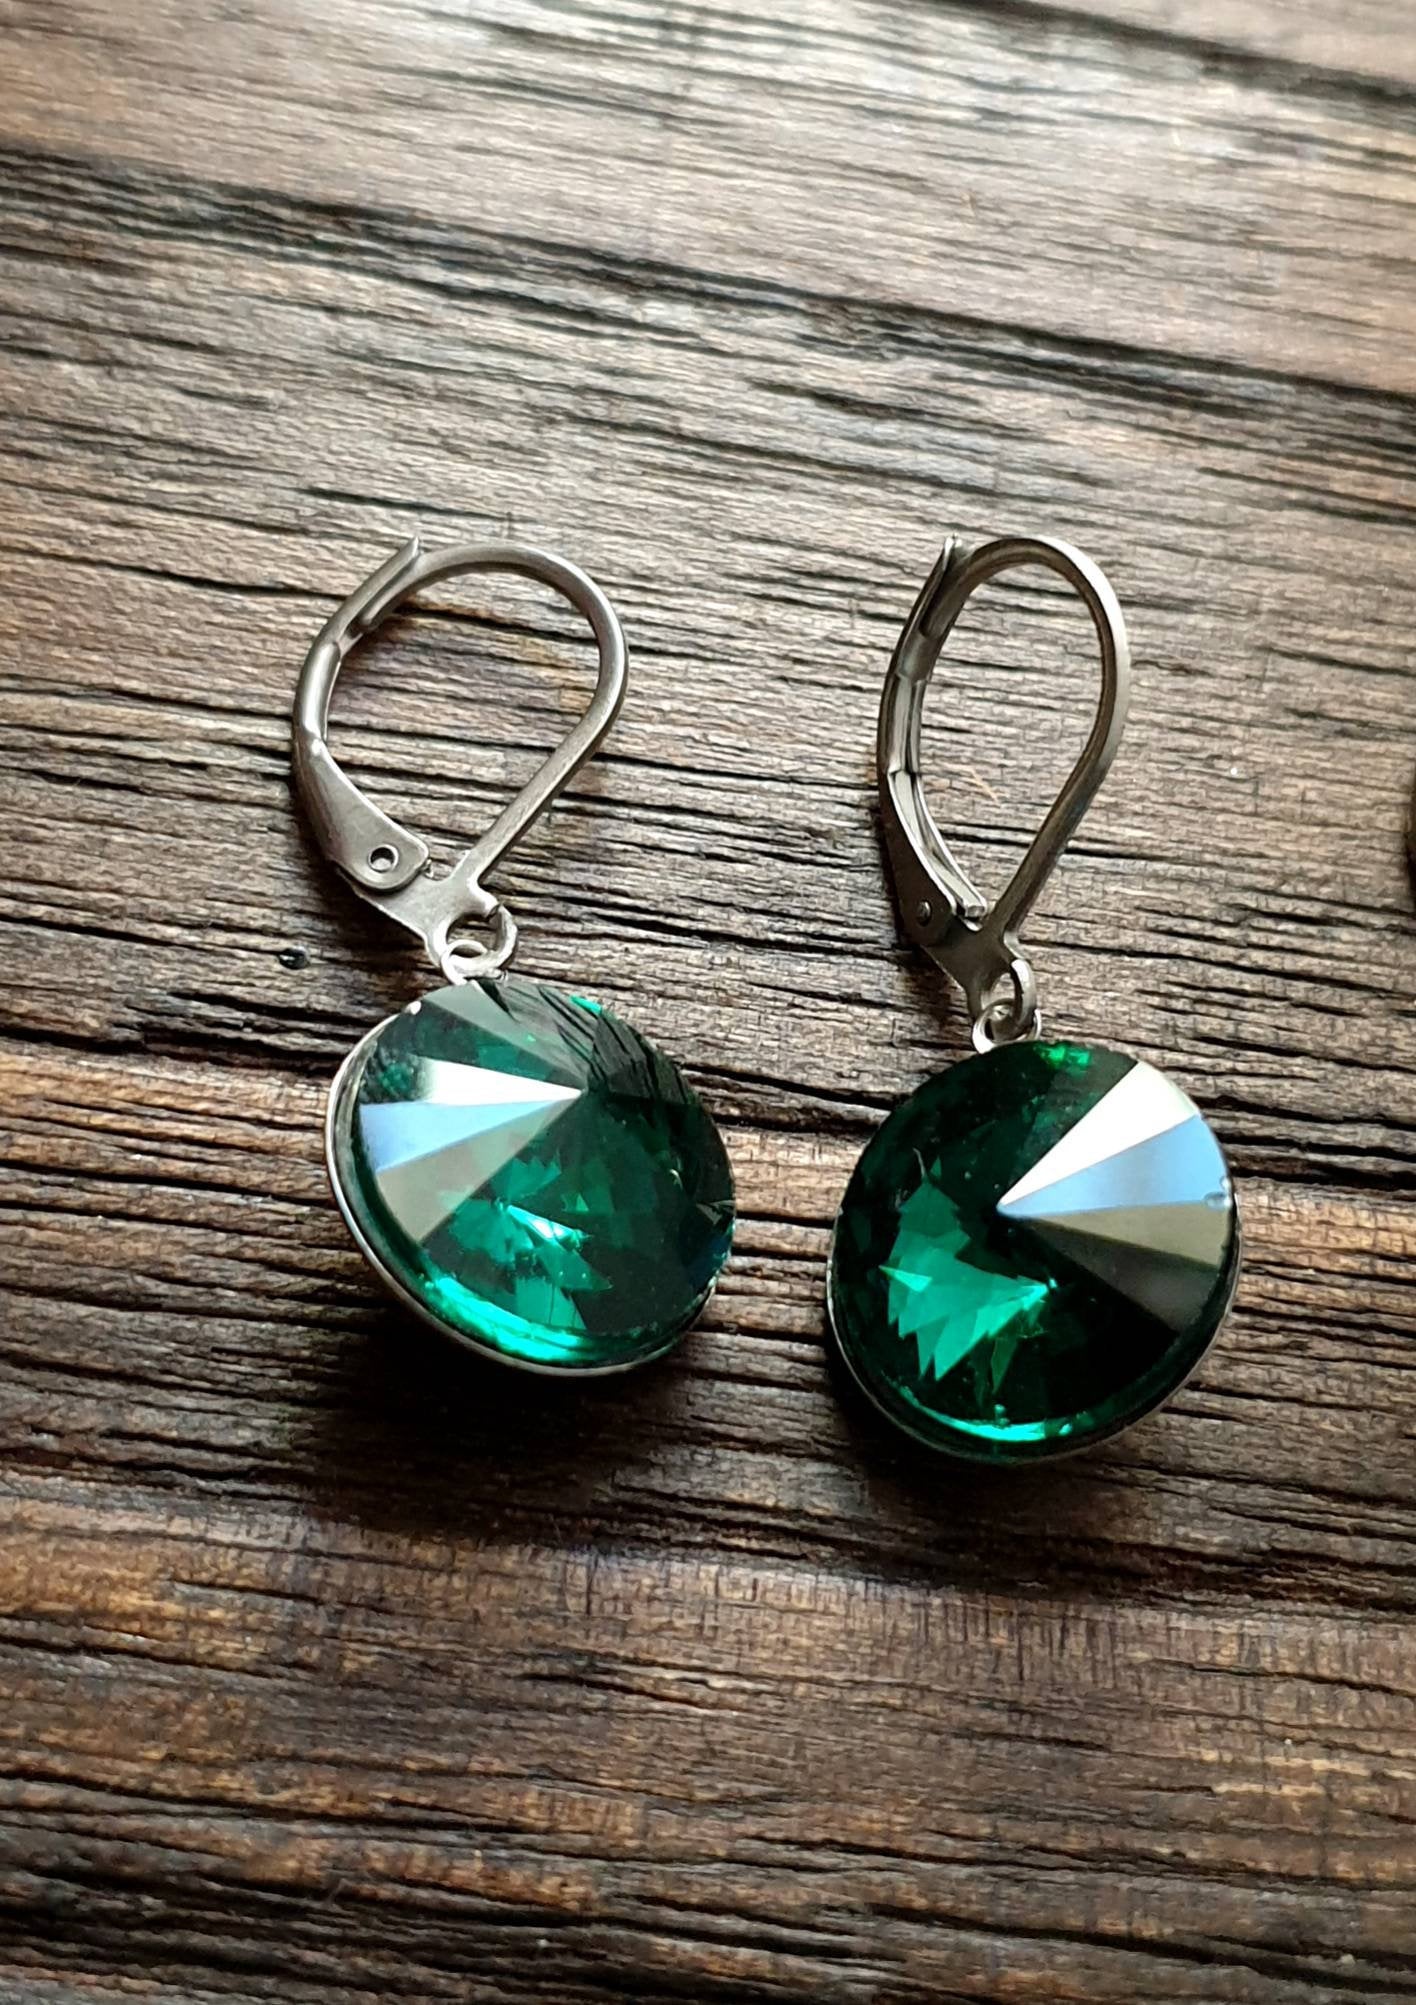 Glass Crystal Leverback Earrings Stainless Steel. Choose colour: Clear, Black Diamond, Emerald Green, Aquamarine, Red 12mm